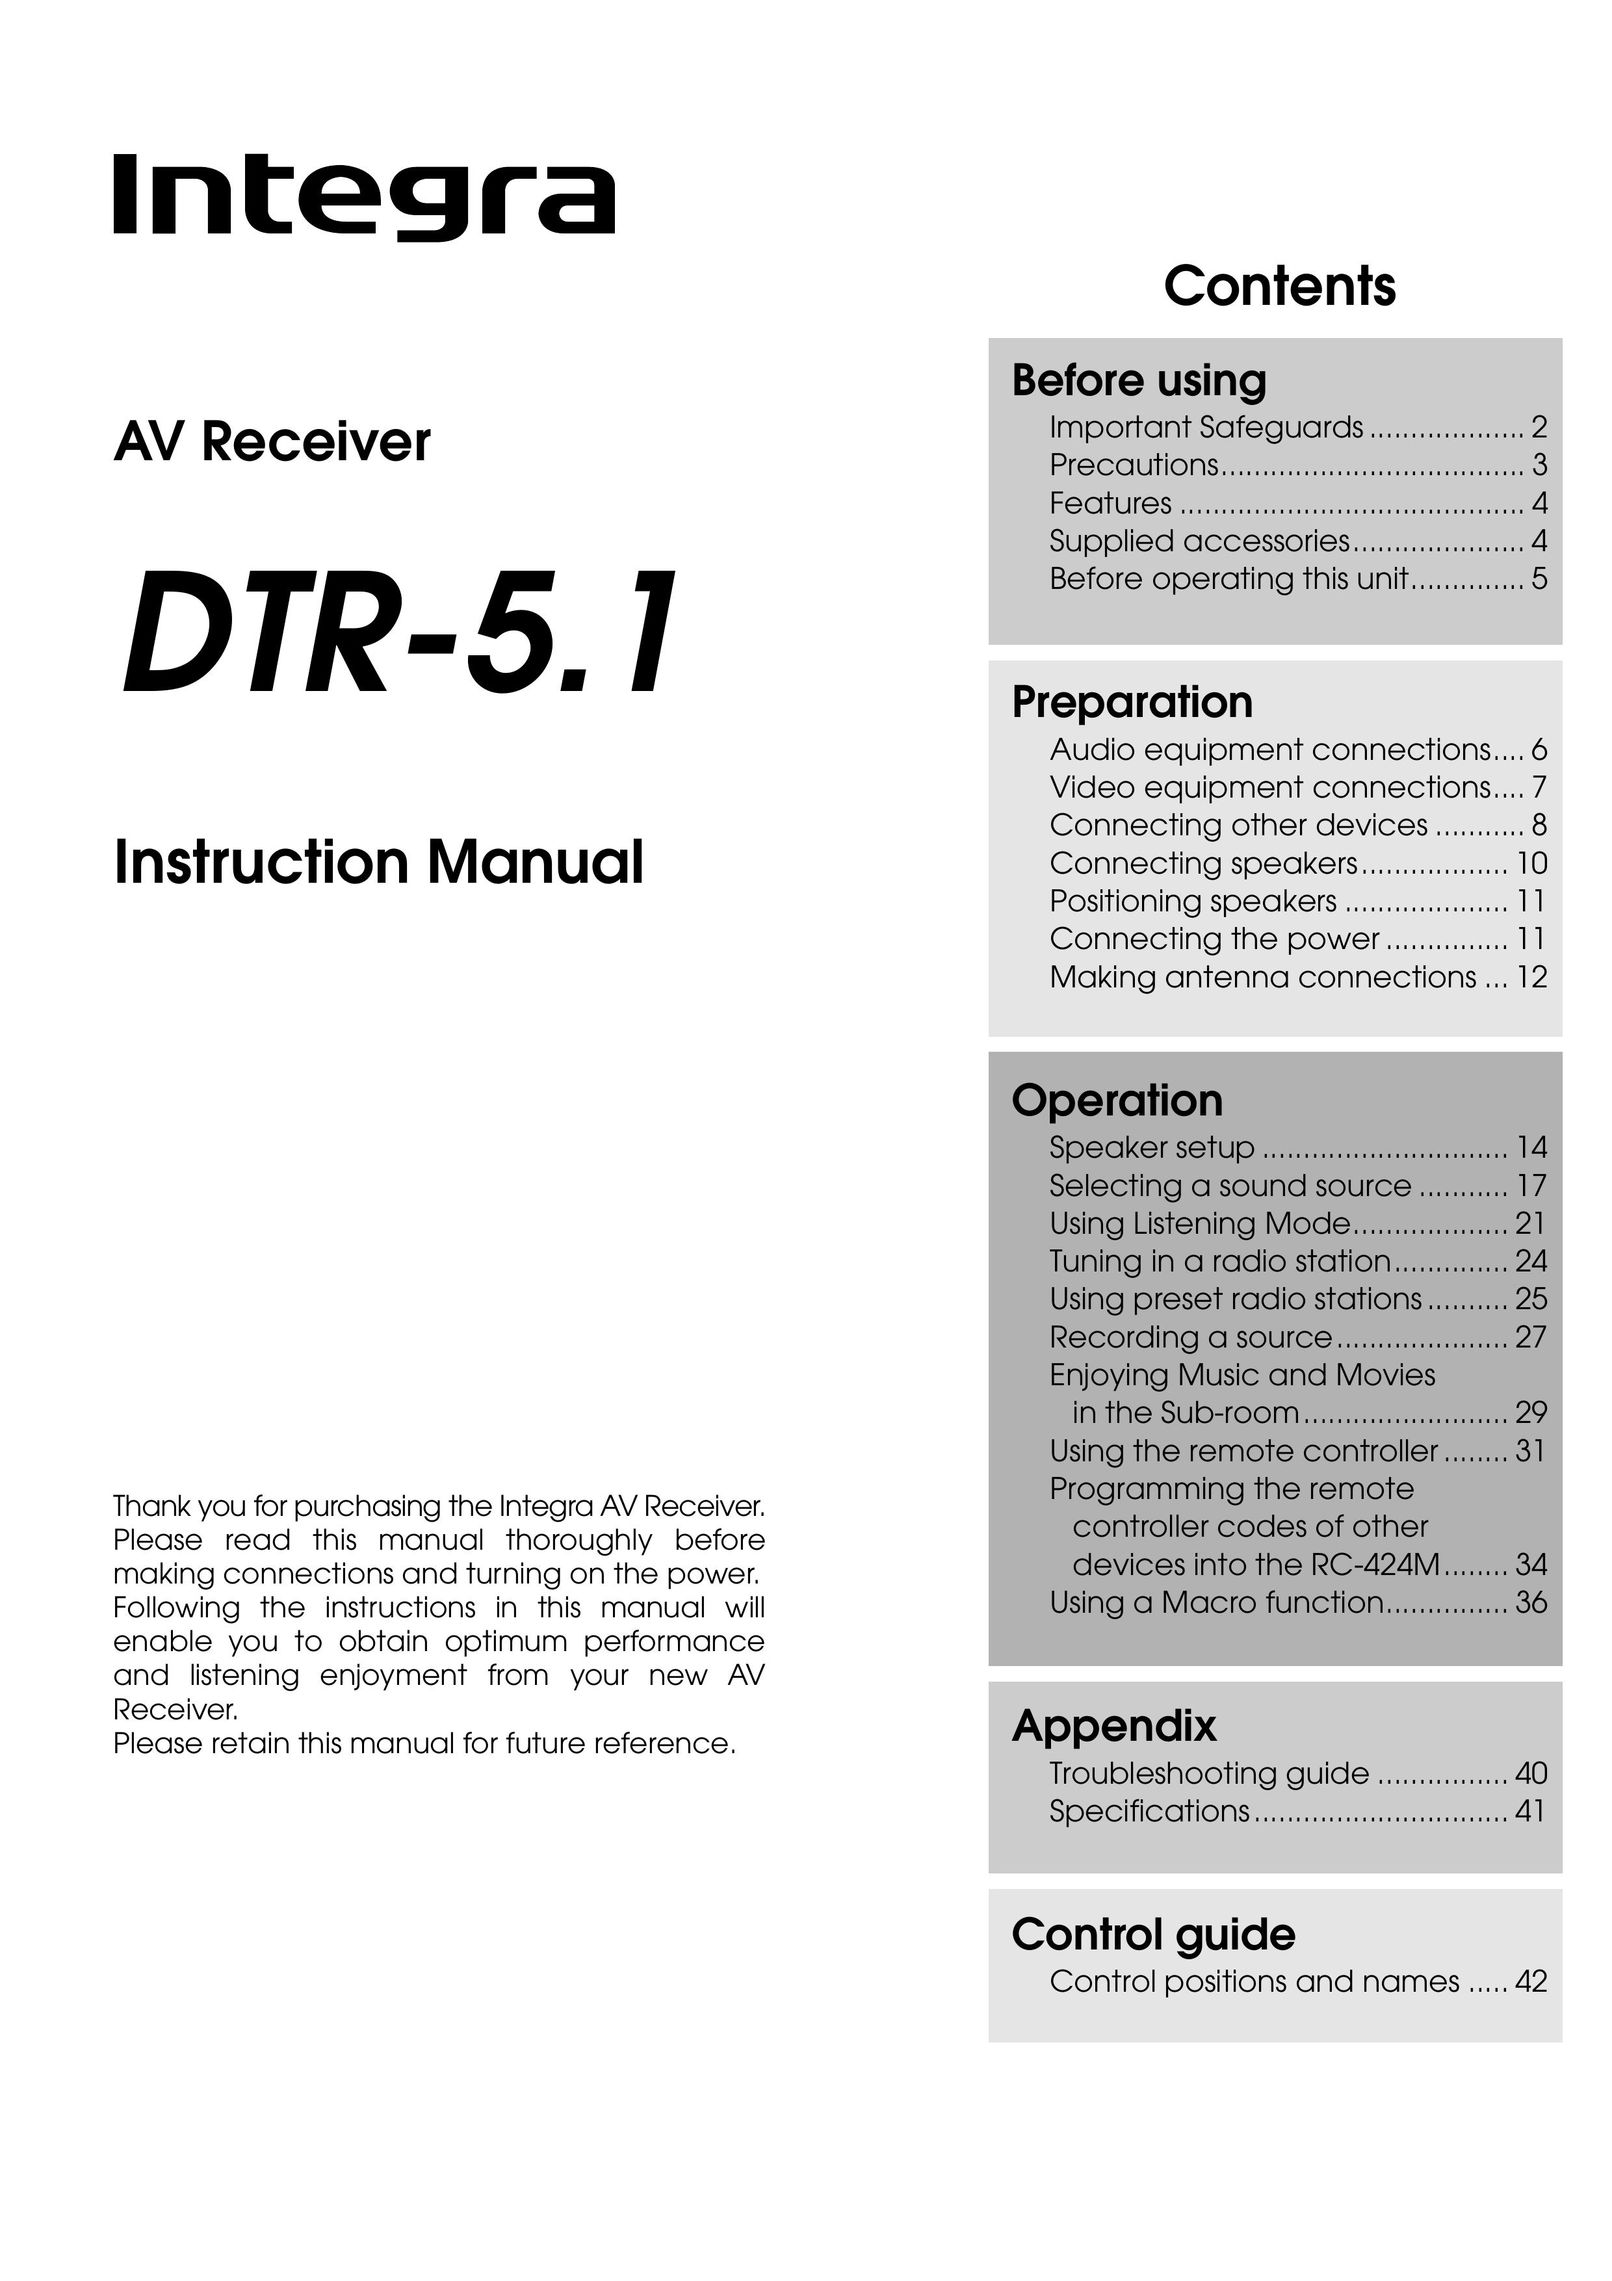 Integra DTR-5.1 Stereo Receiver User Manual (Page 1)